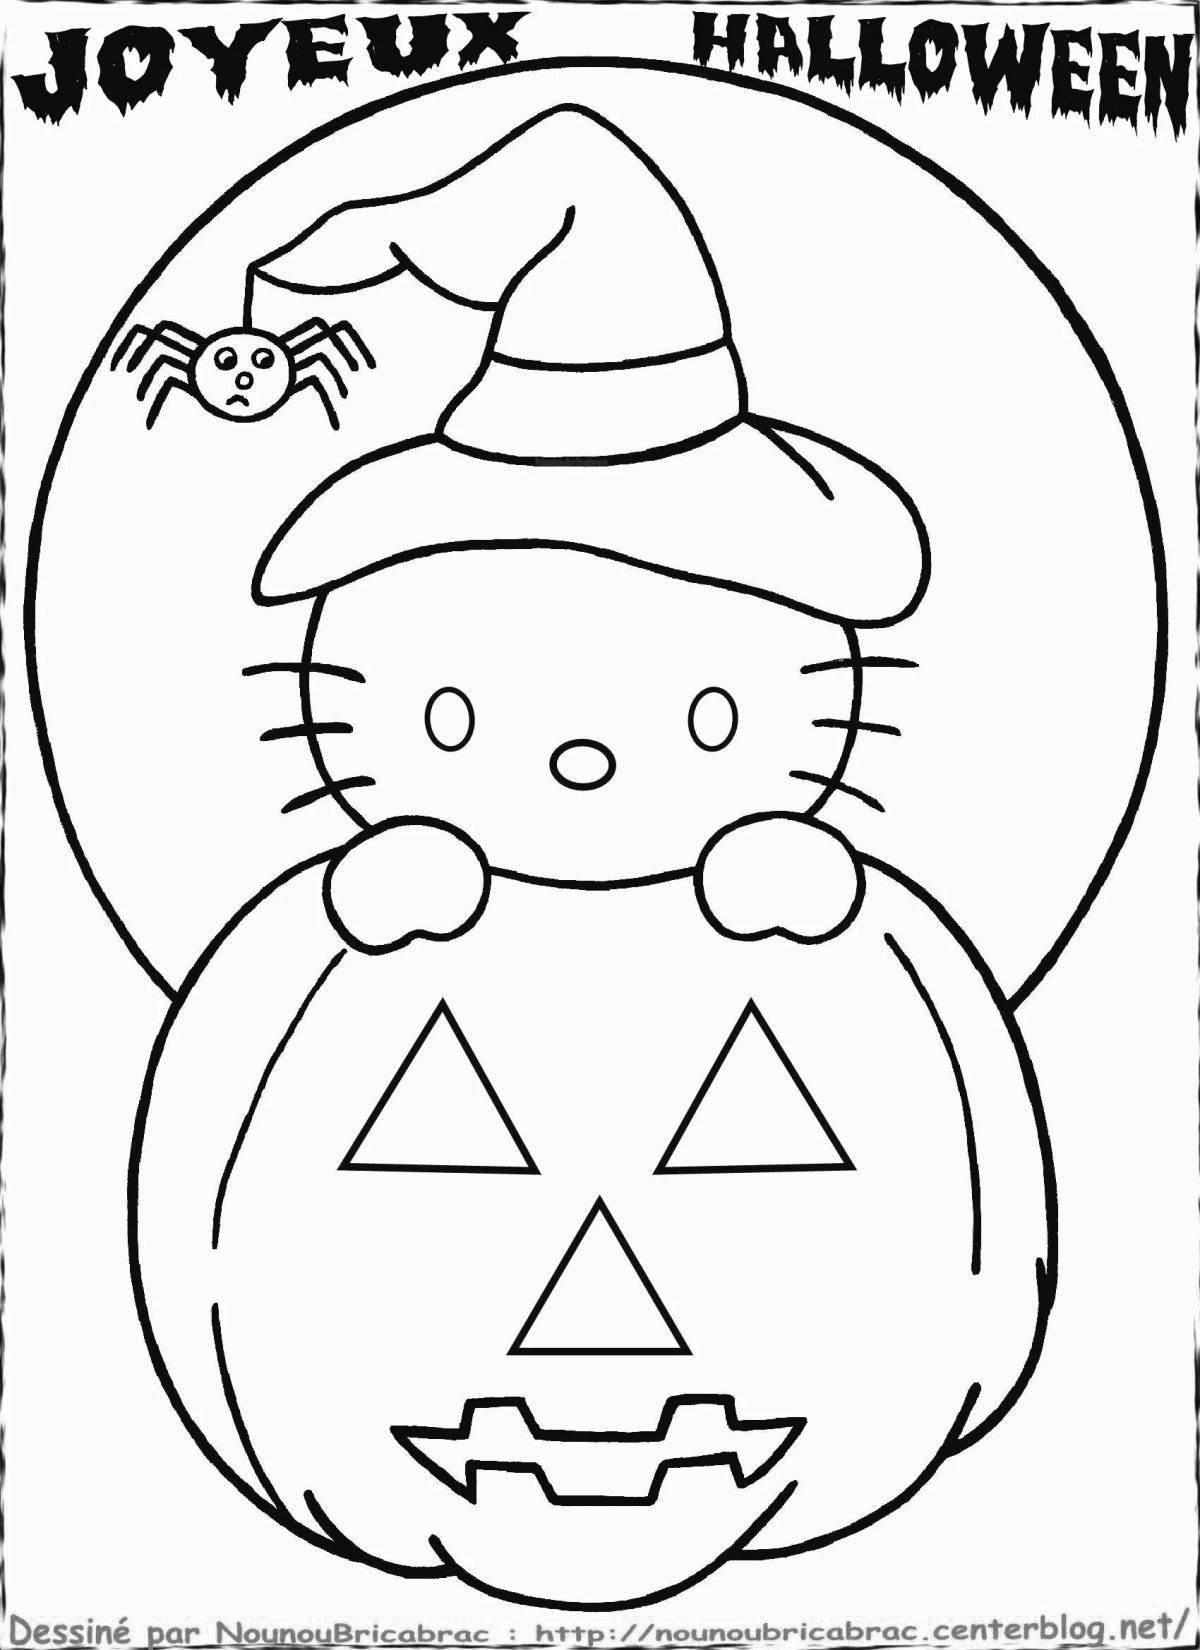 Spooky halloween kitty coloring book